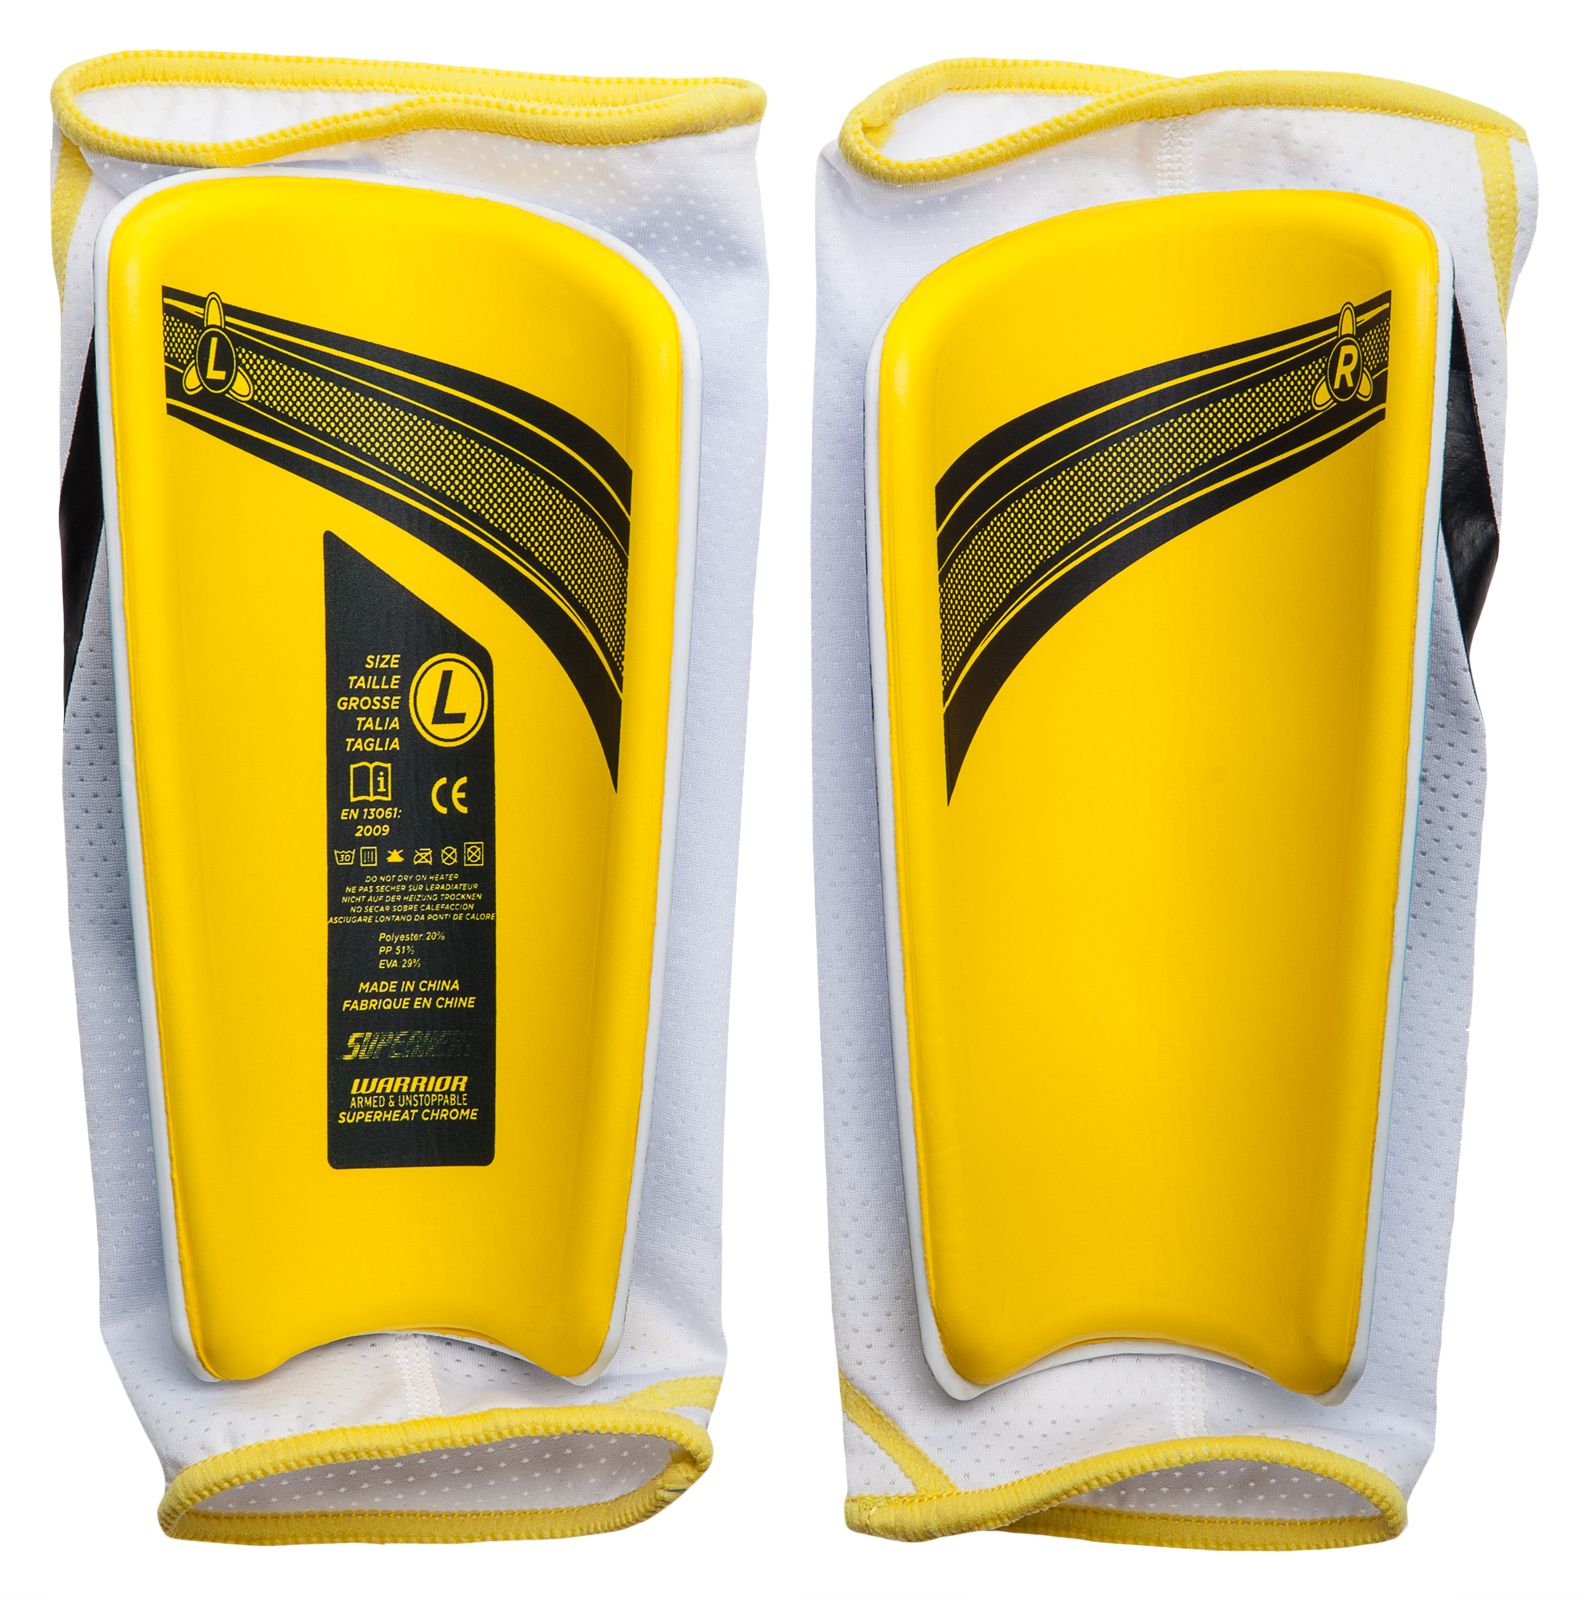 Superheat Chrome Shinguard, Blue with Aviator & Cyber Yellow image number 1